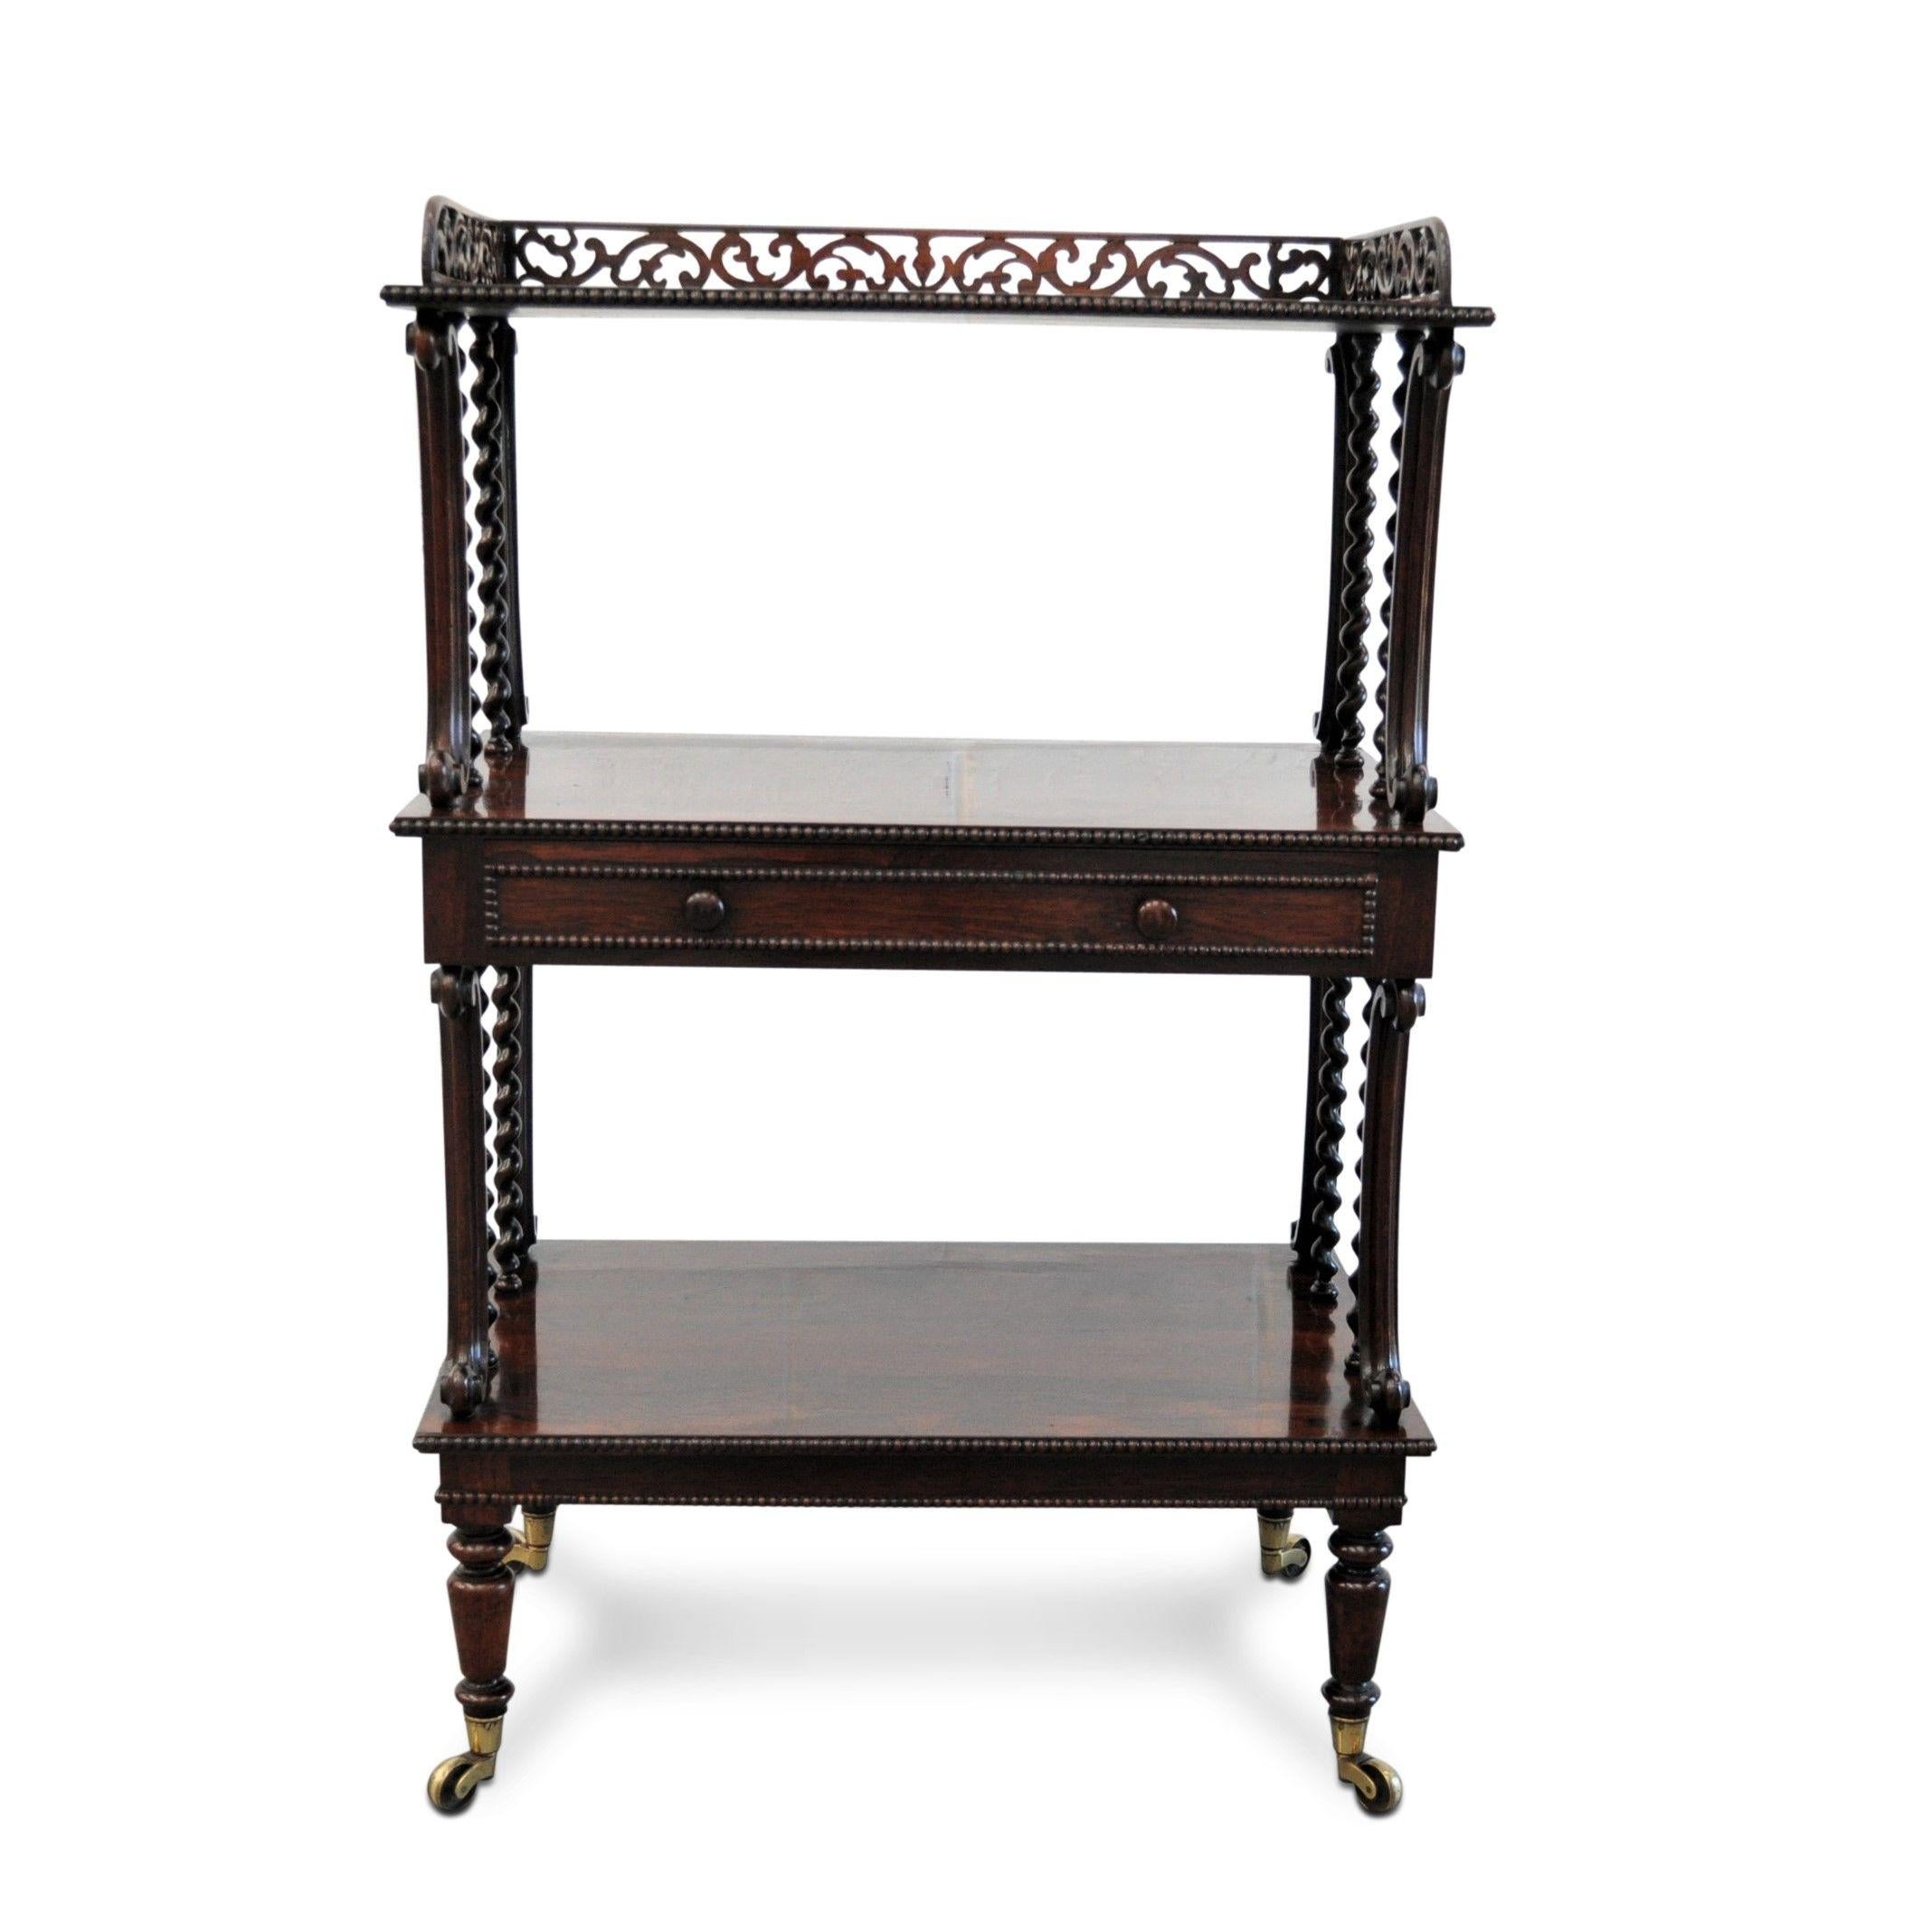 English Rare and Unusual Regency Etagere For Sale